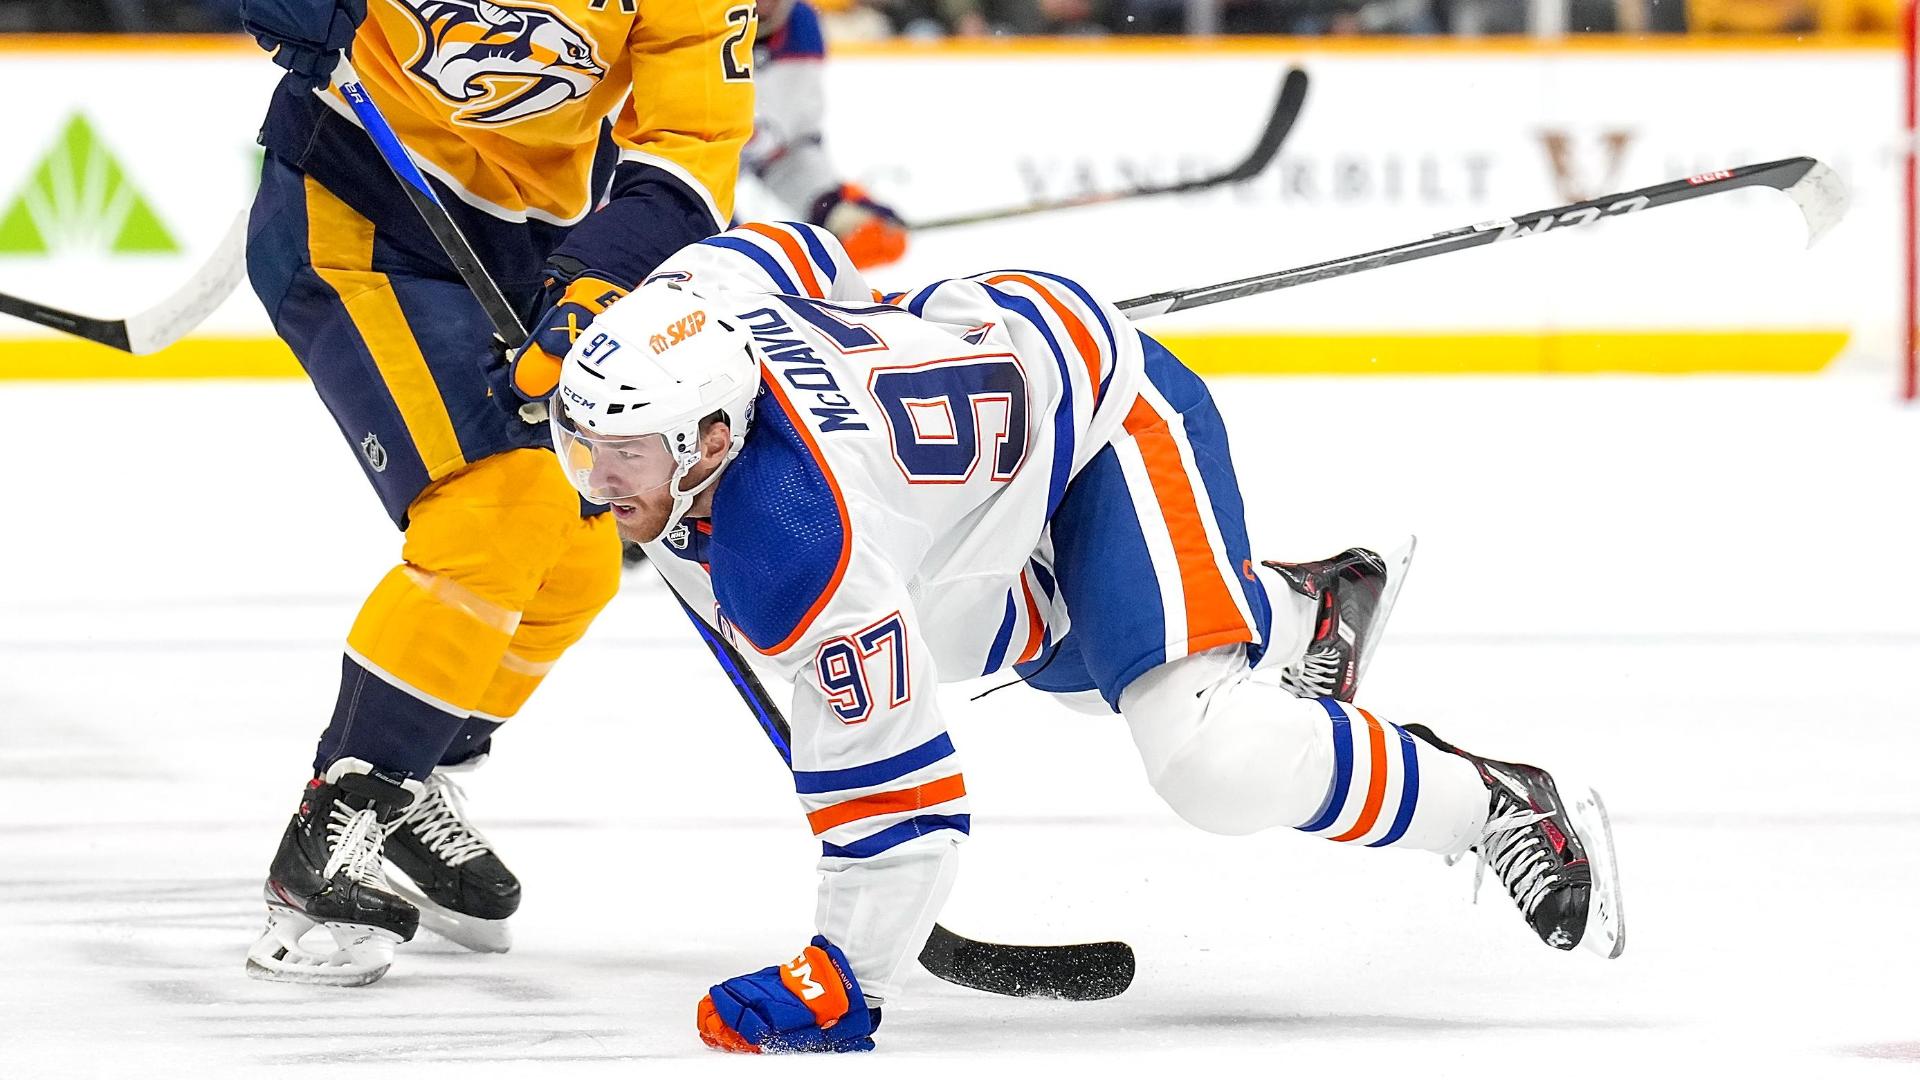 How did Connor McDavid recover to score this goal? Stream the Video